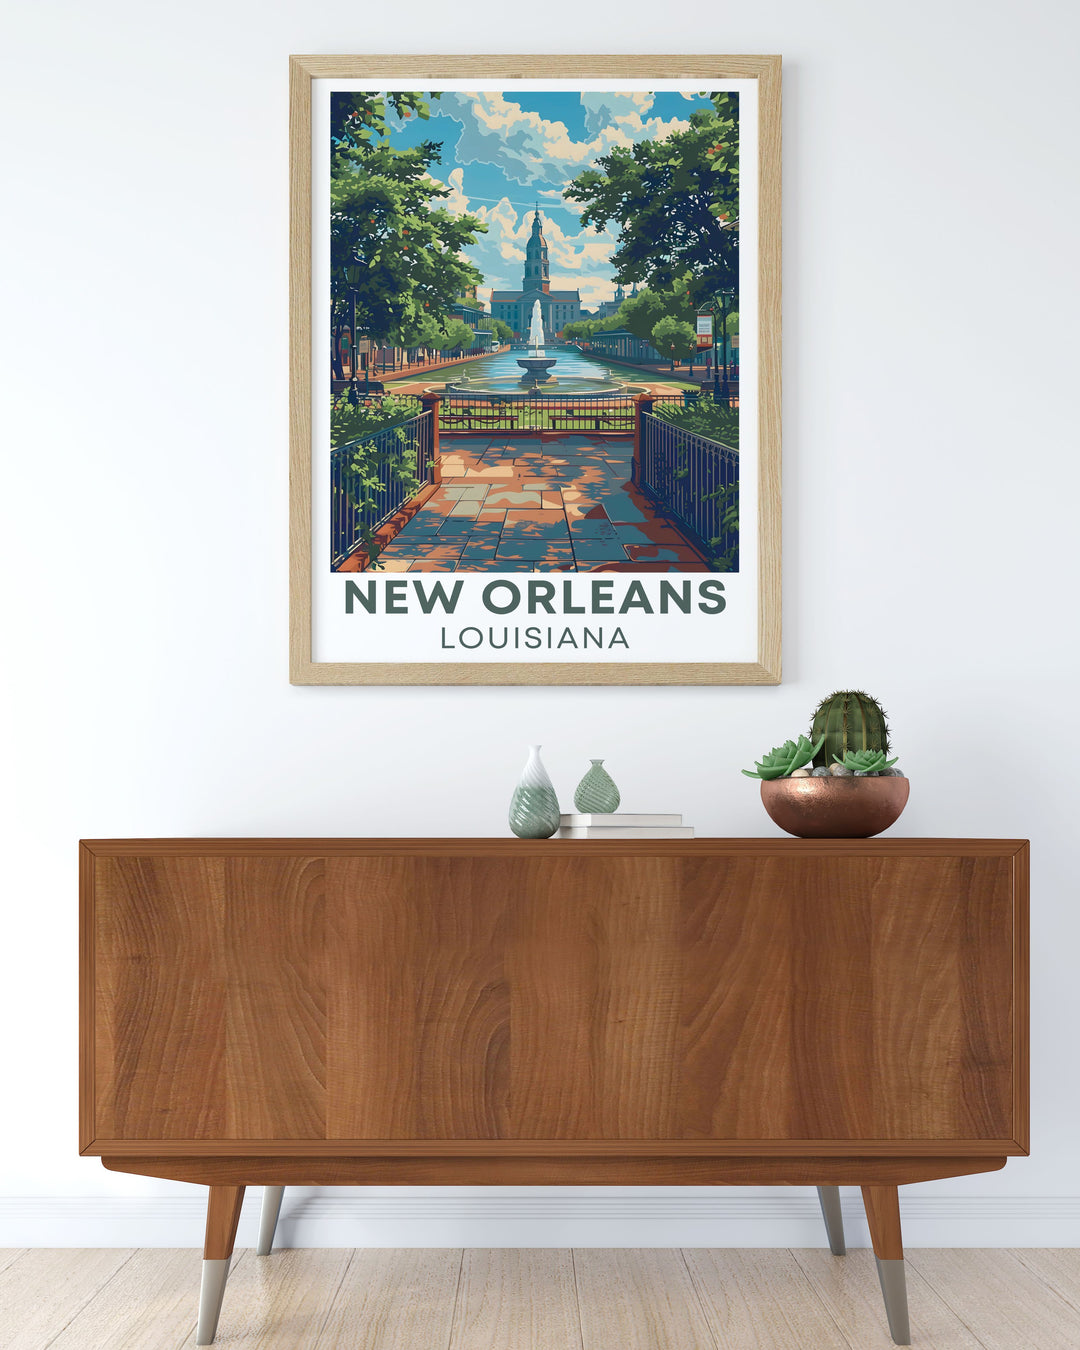 High quality Jackson Square wall art showcasing the iconic landmark of New Orleans perfect for enhancing your living space and bringing a piece of Louisiana history into your home decor